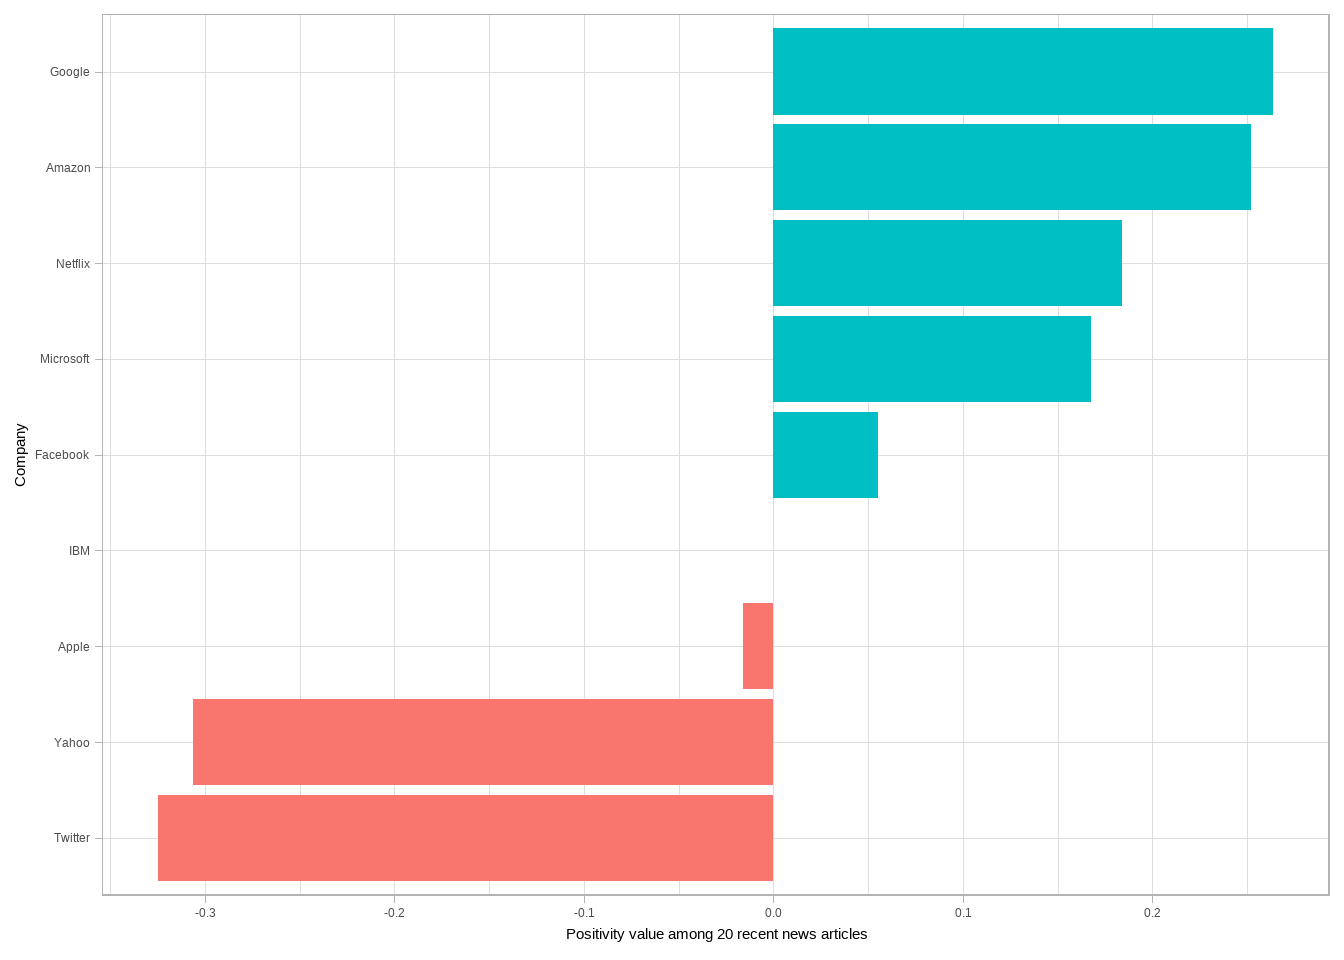 "Positivity" of the news coverage around each stock in January 2017, calculated as (positive - negative) / (positive + negative), based on uses of positive and negative words in 20 recent news articles about each company